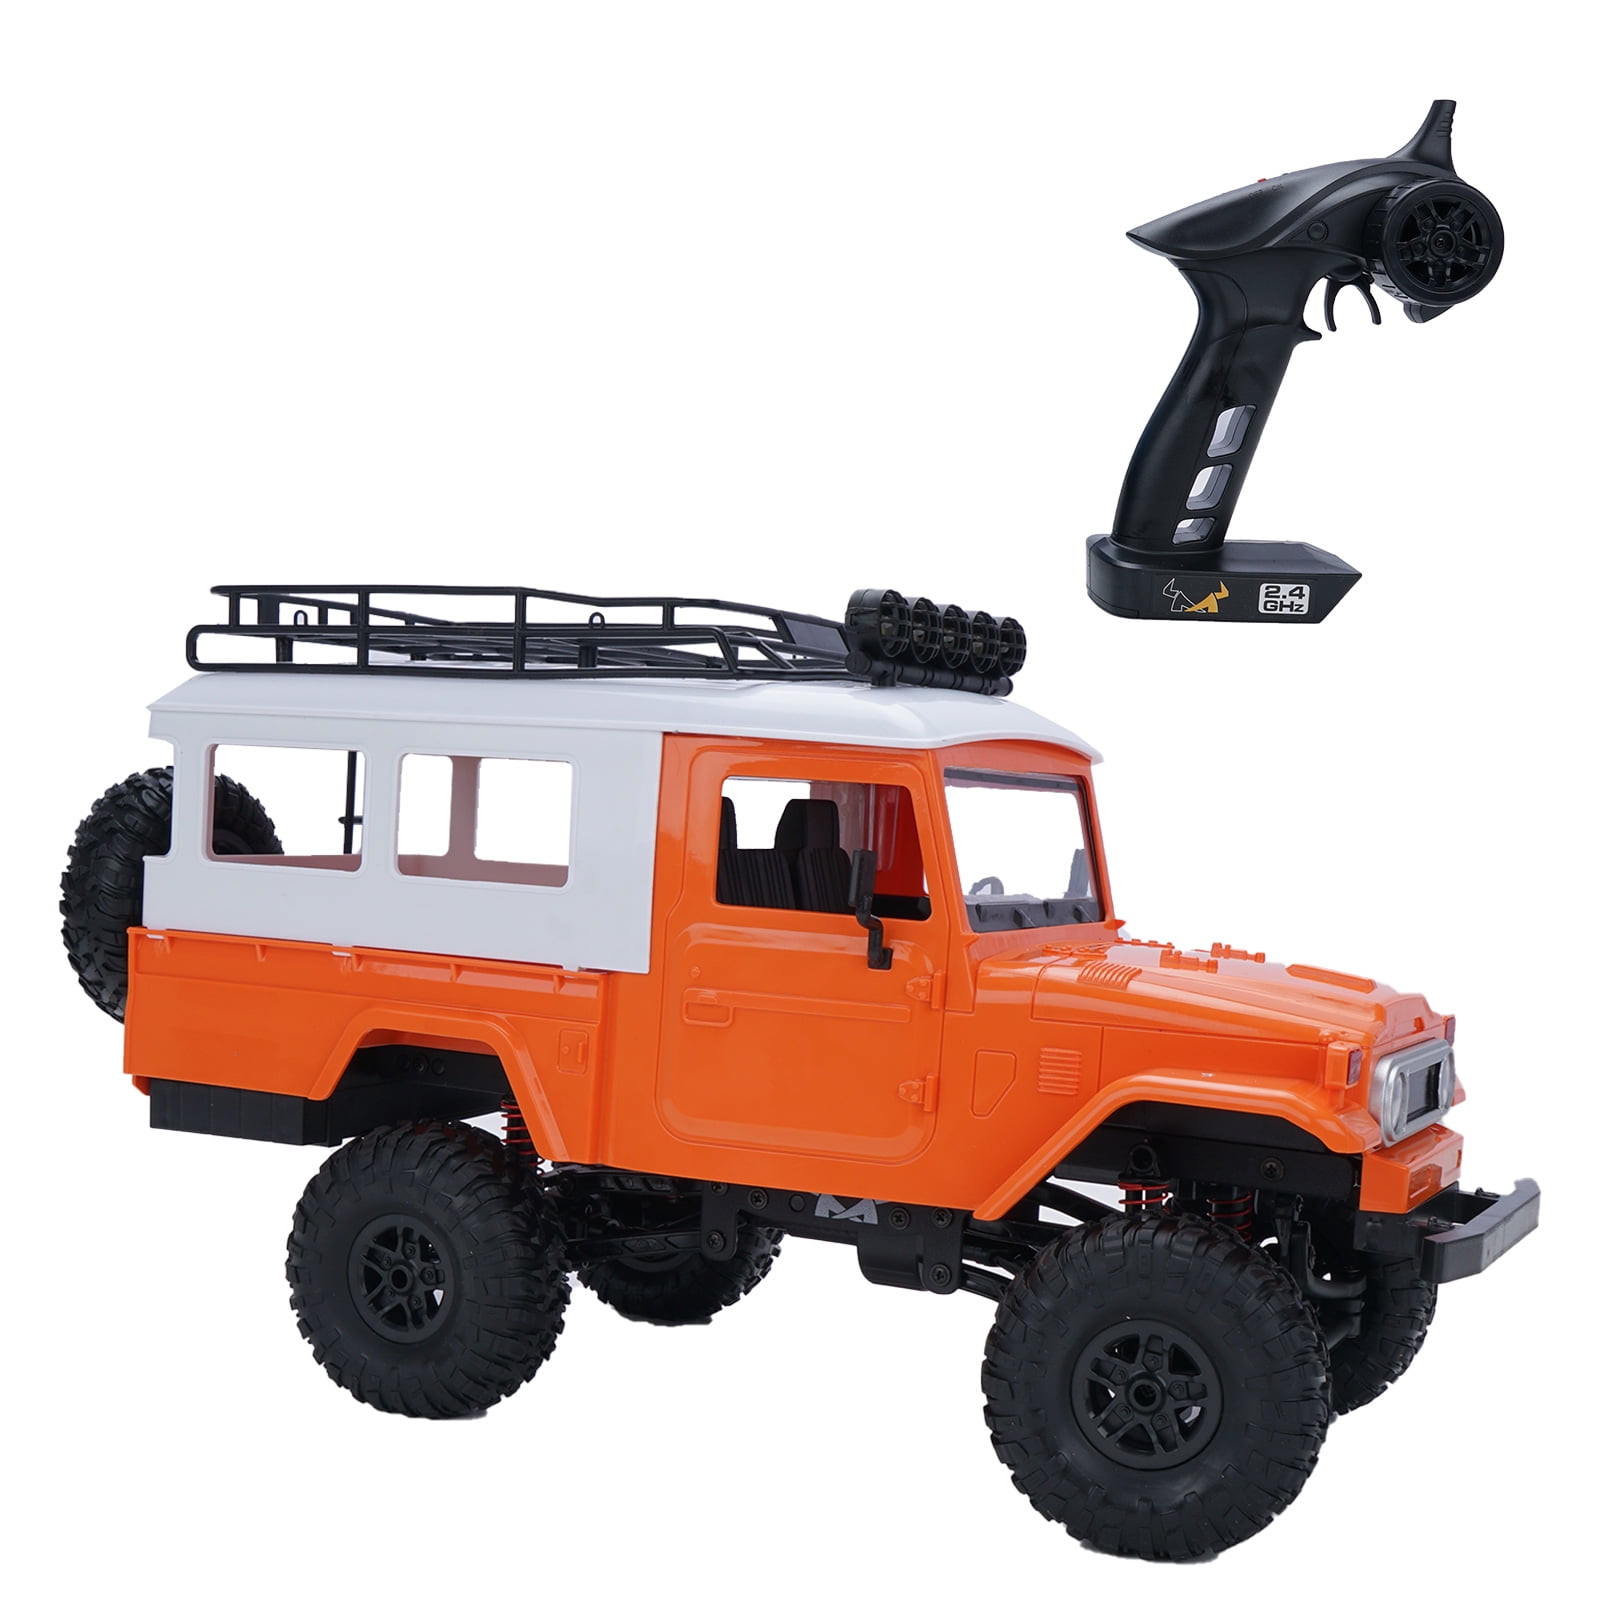 Details about   1:12 RC Car Off-road Climbing Remote Control Car 2.4Hz Radio Rc Car Children Toy 